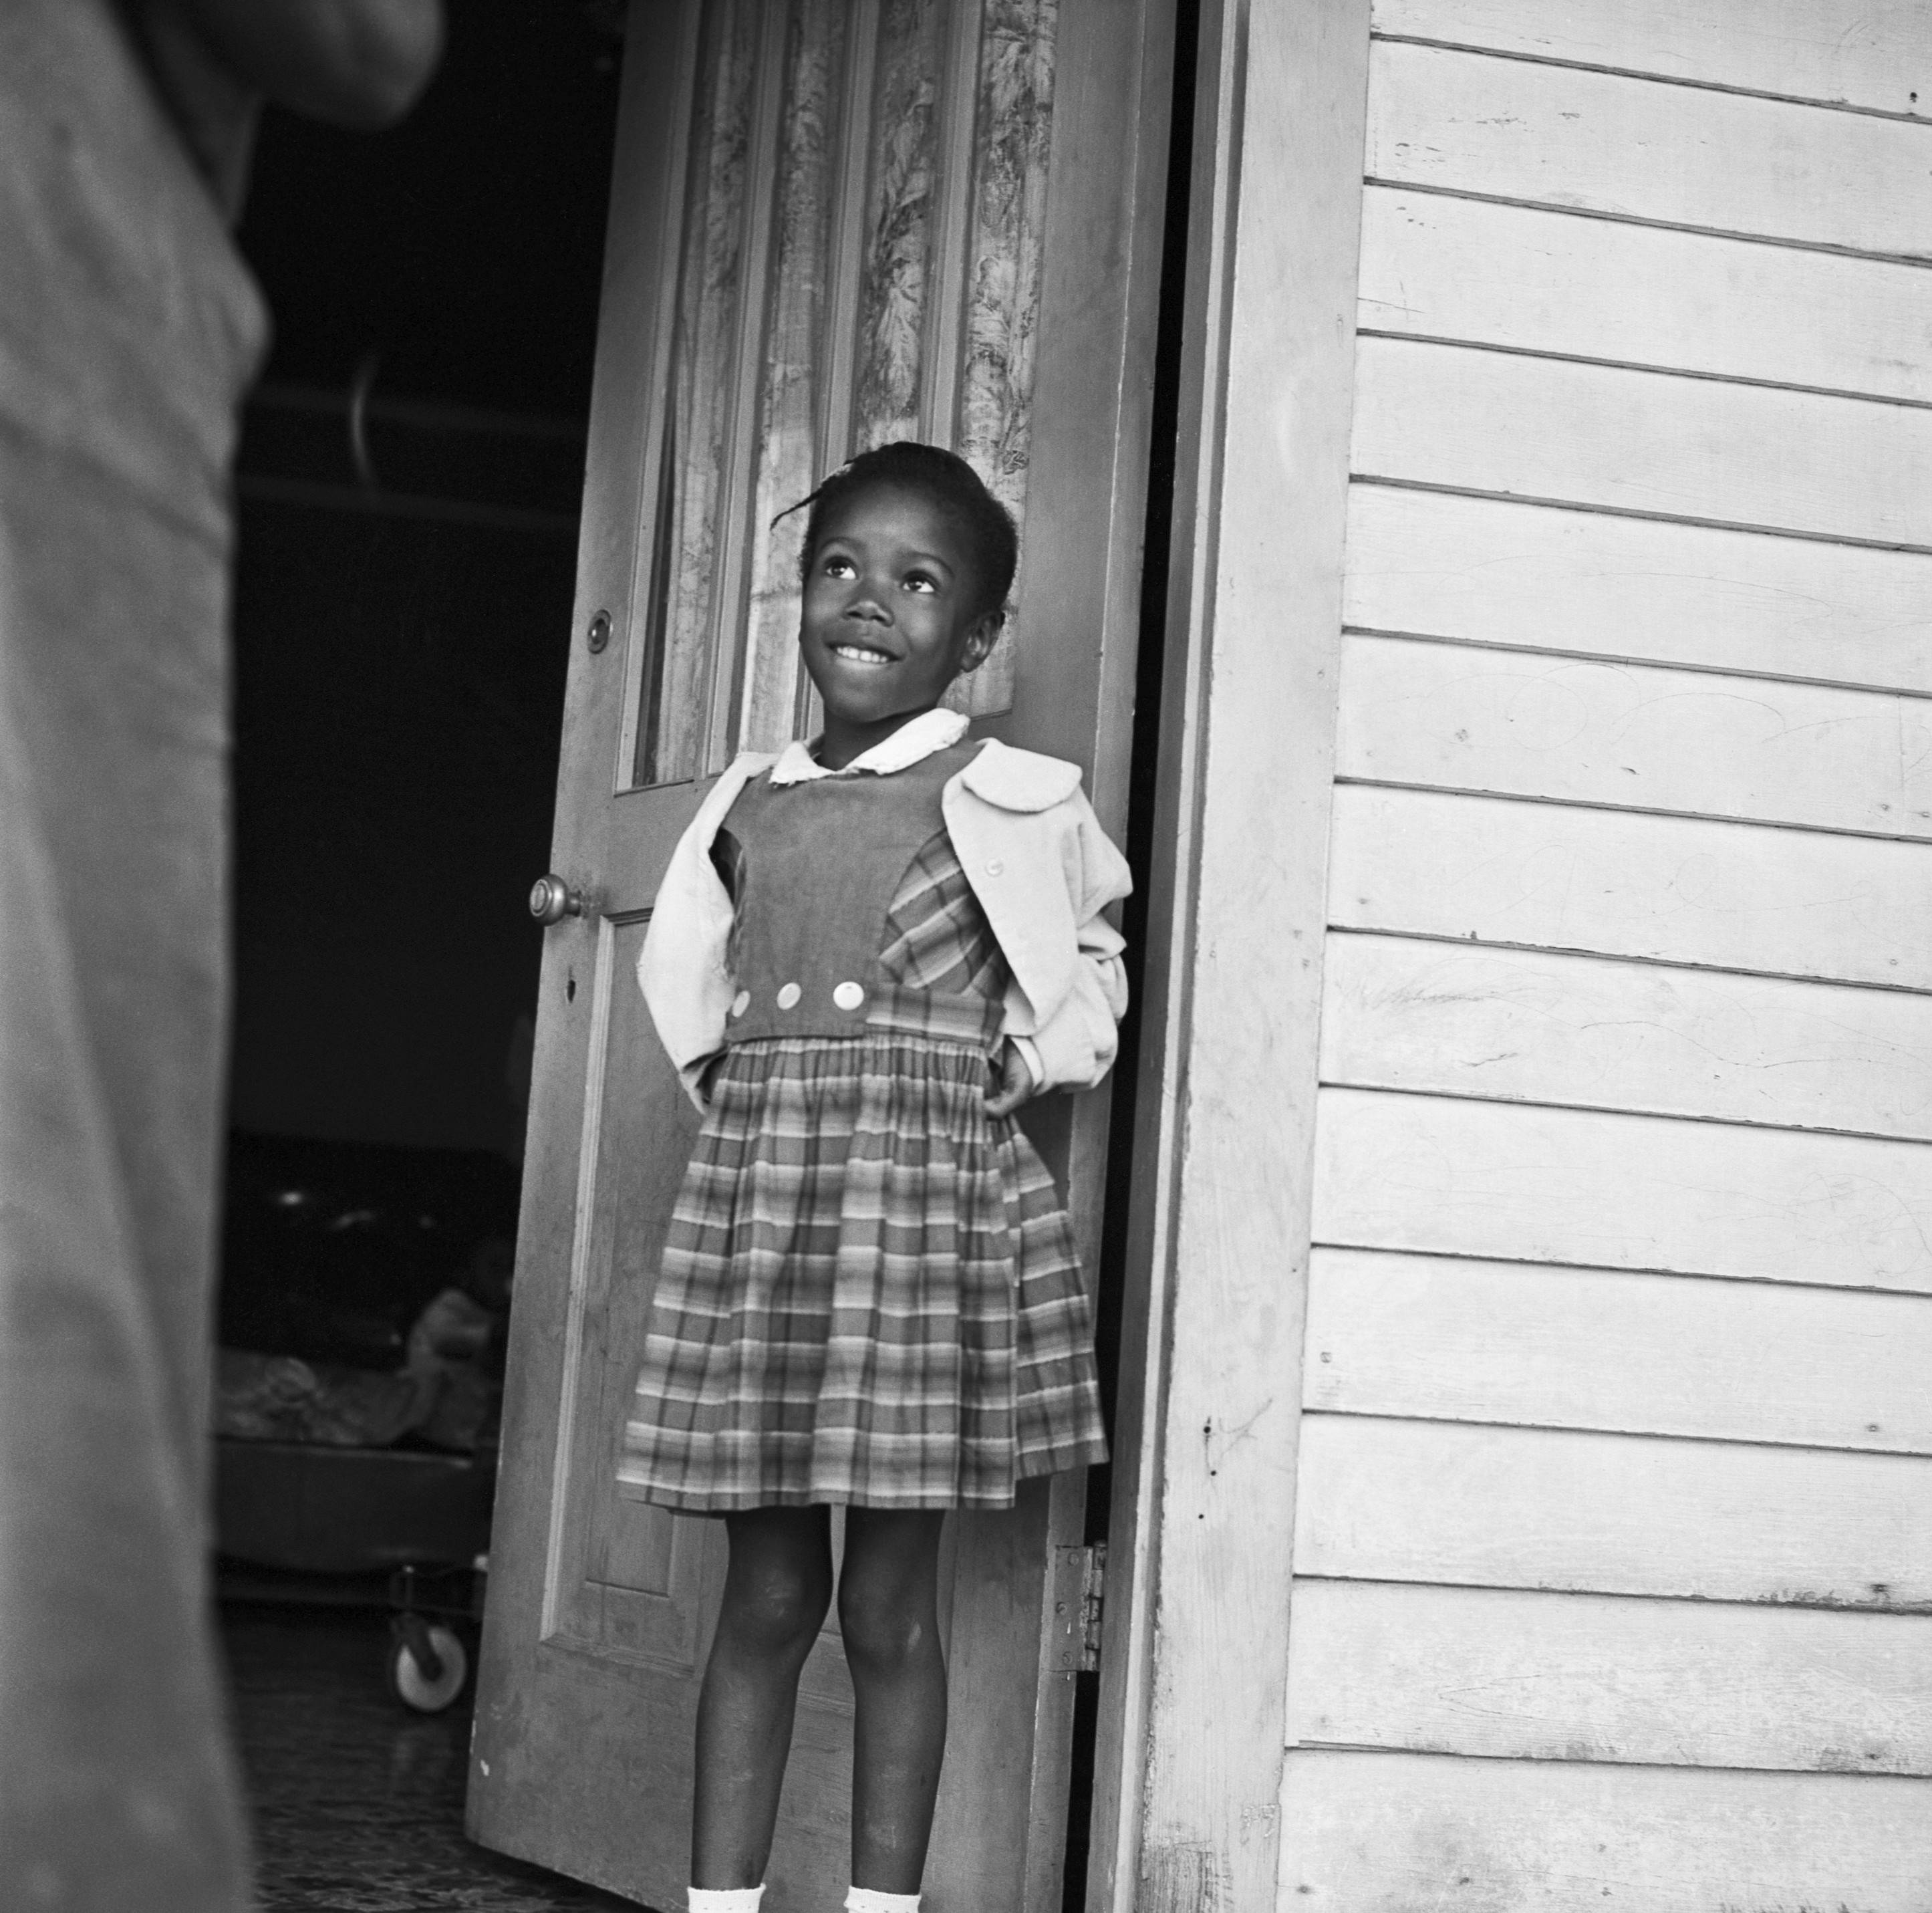 Ruby Bridges, the first black child to attend an all-white elementary school, 1960. Go on girl